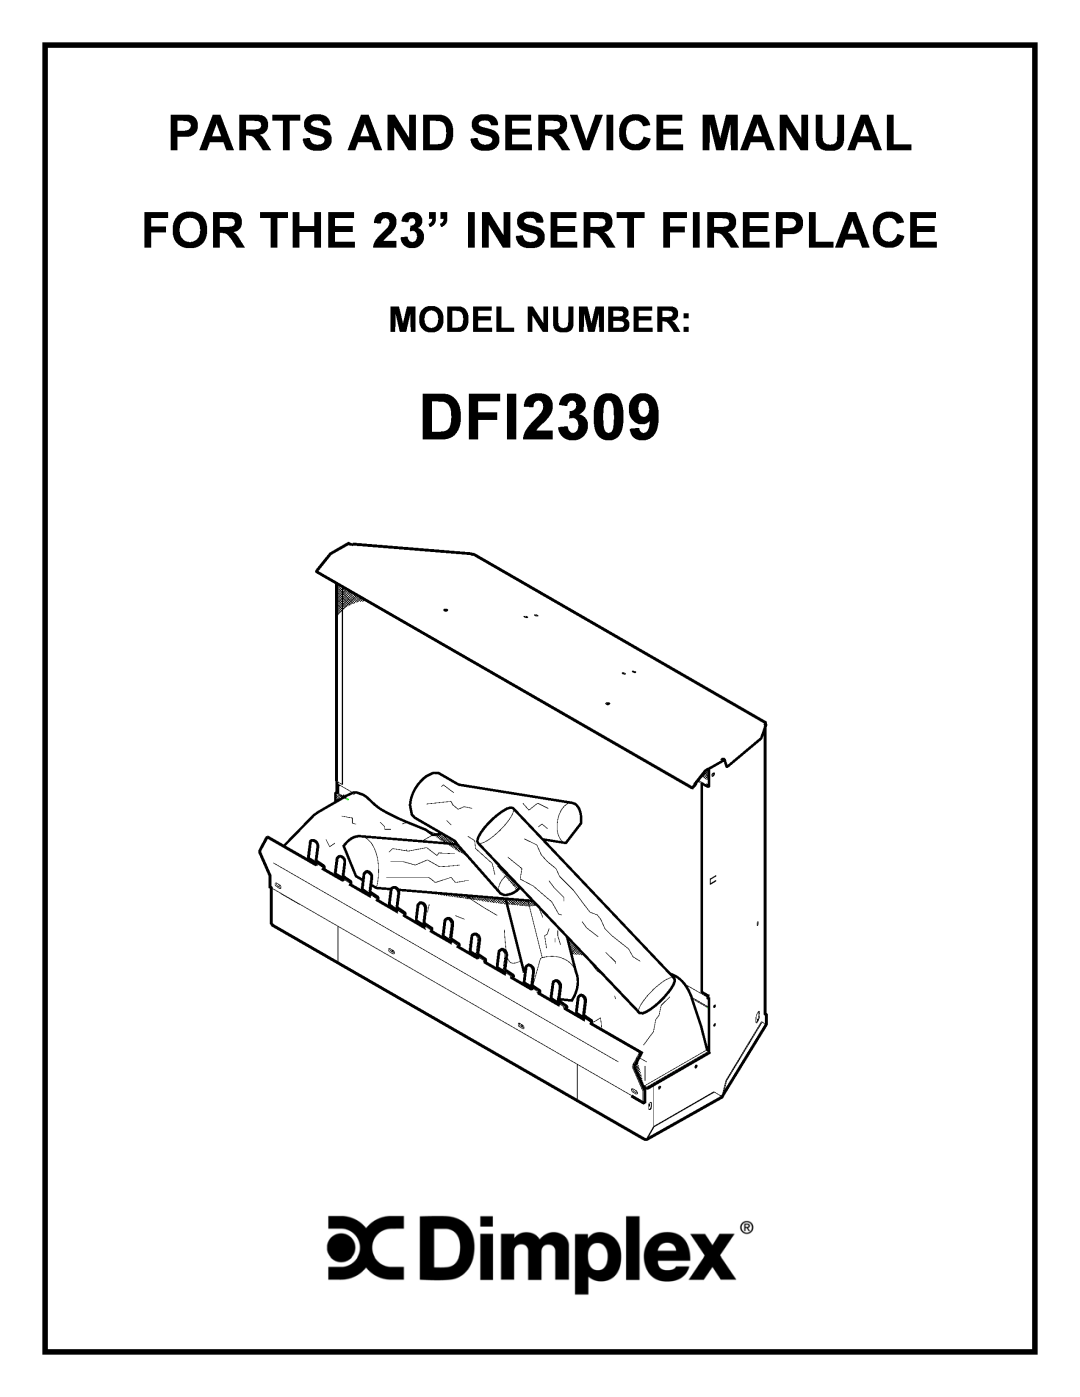 Dimplex DFI2309 service manual FOR THE 23” INSERT FIREPLACE, Model Number 